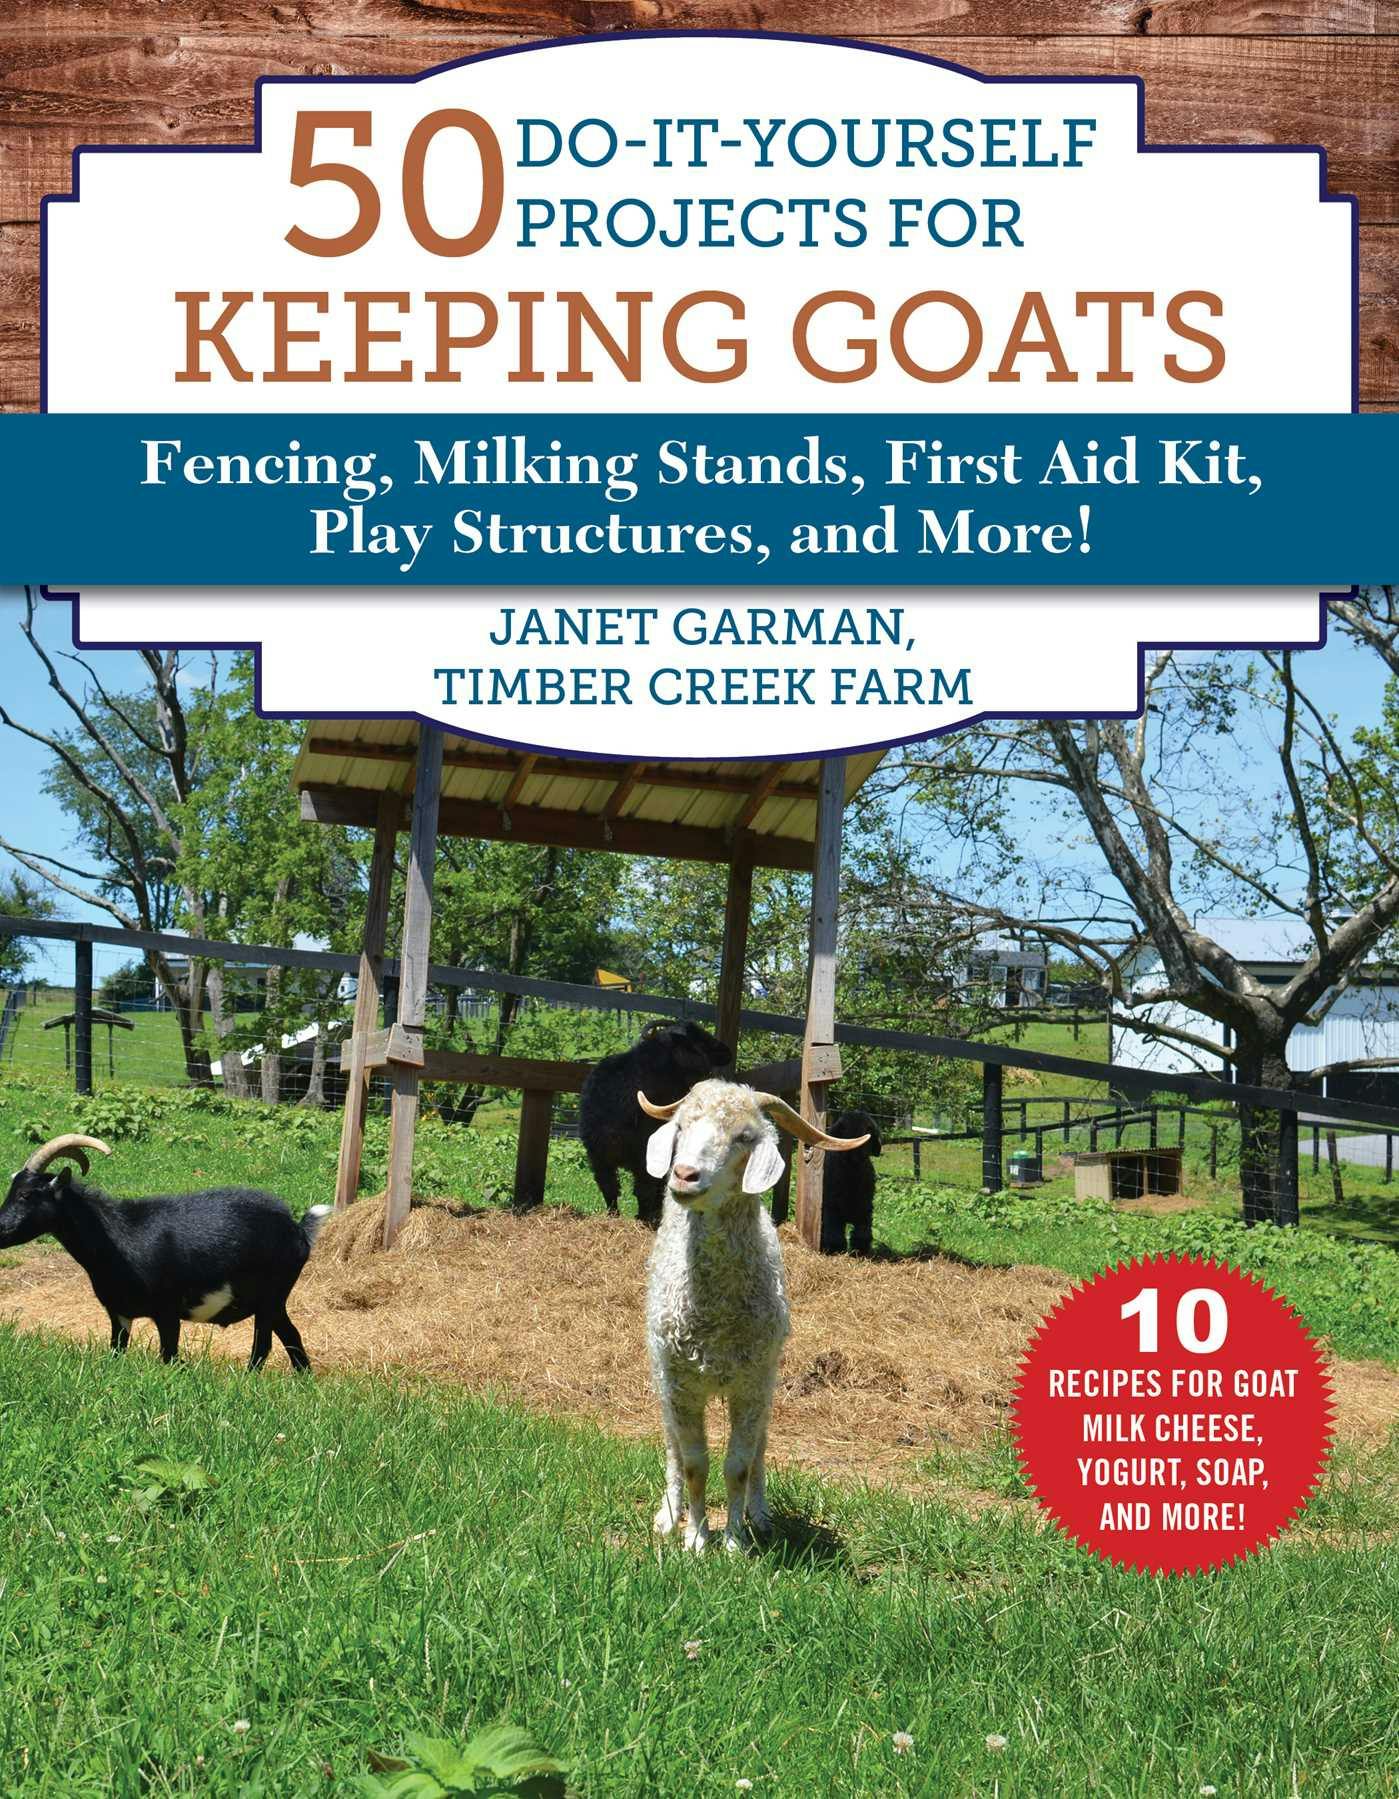 50 Do-It-Yourself Projects for Keeping Goats: Fencing, Milking Stands, First Aid Kit, Play Structures, and More! - Janet Garman